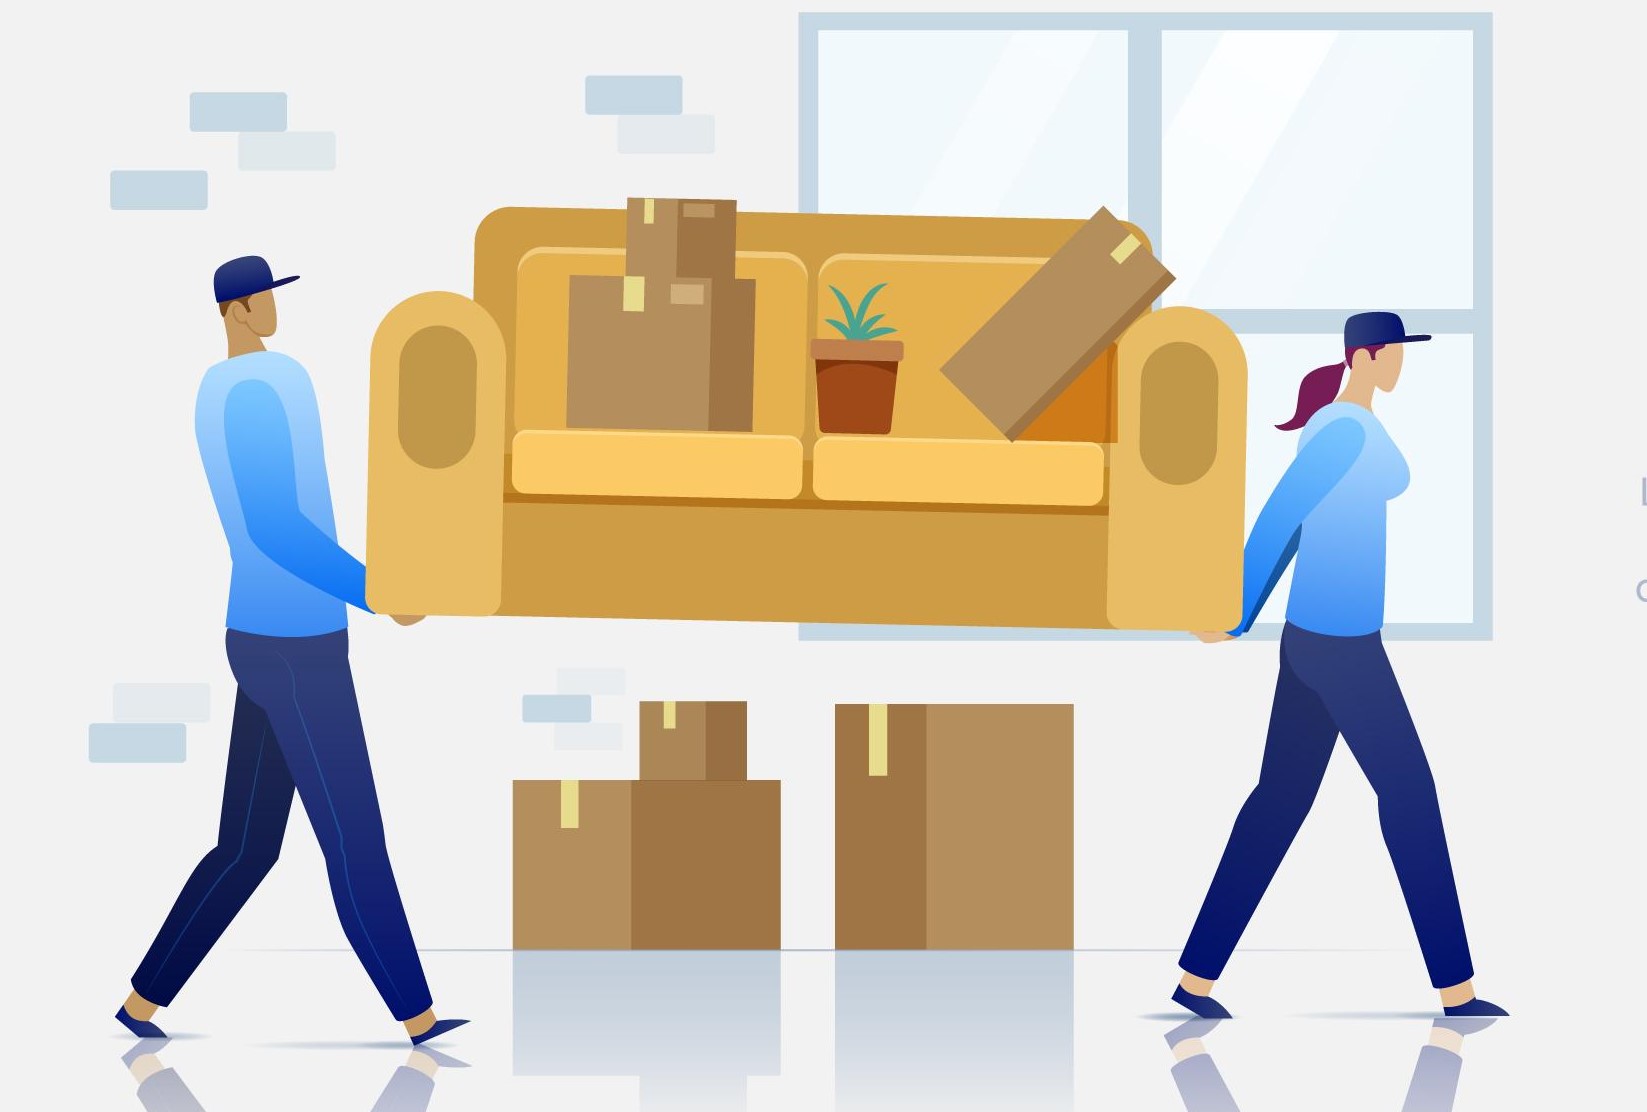 By choosing us as your office movers, you can expect